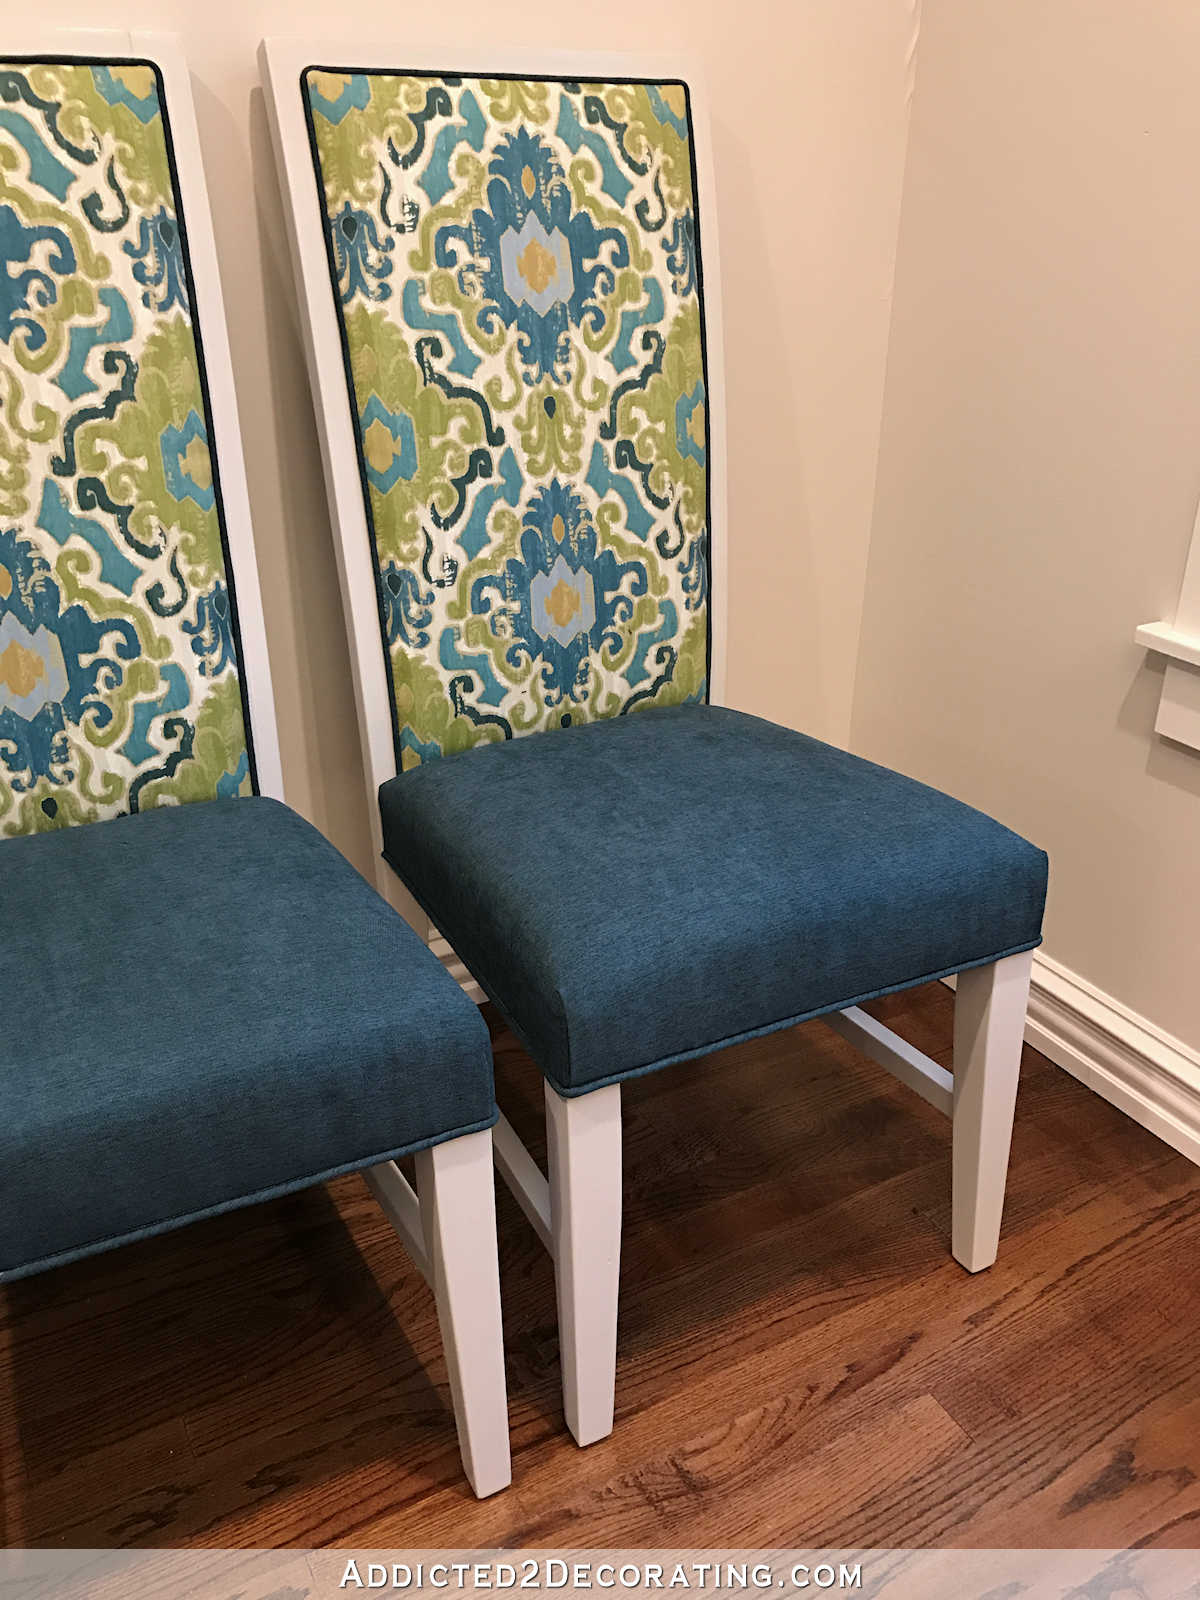 breakfast room dining chair makeover - after - front view of upholstered backrest and seat